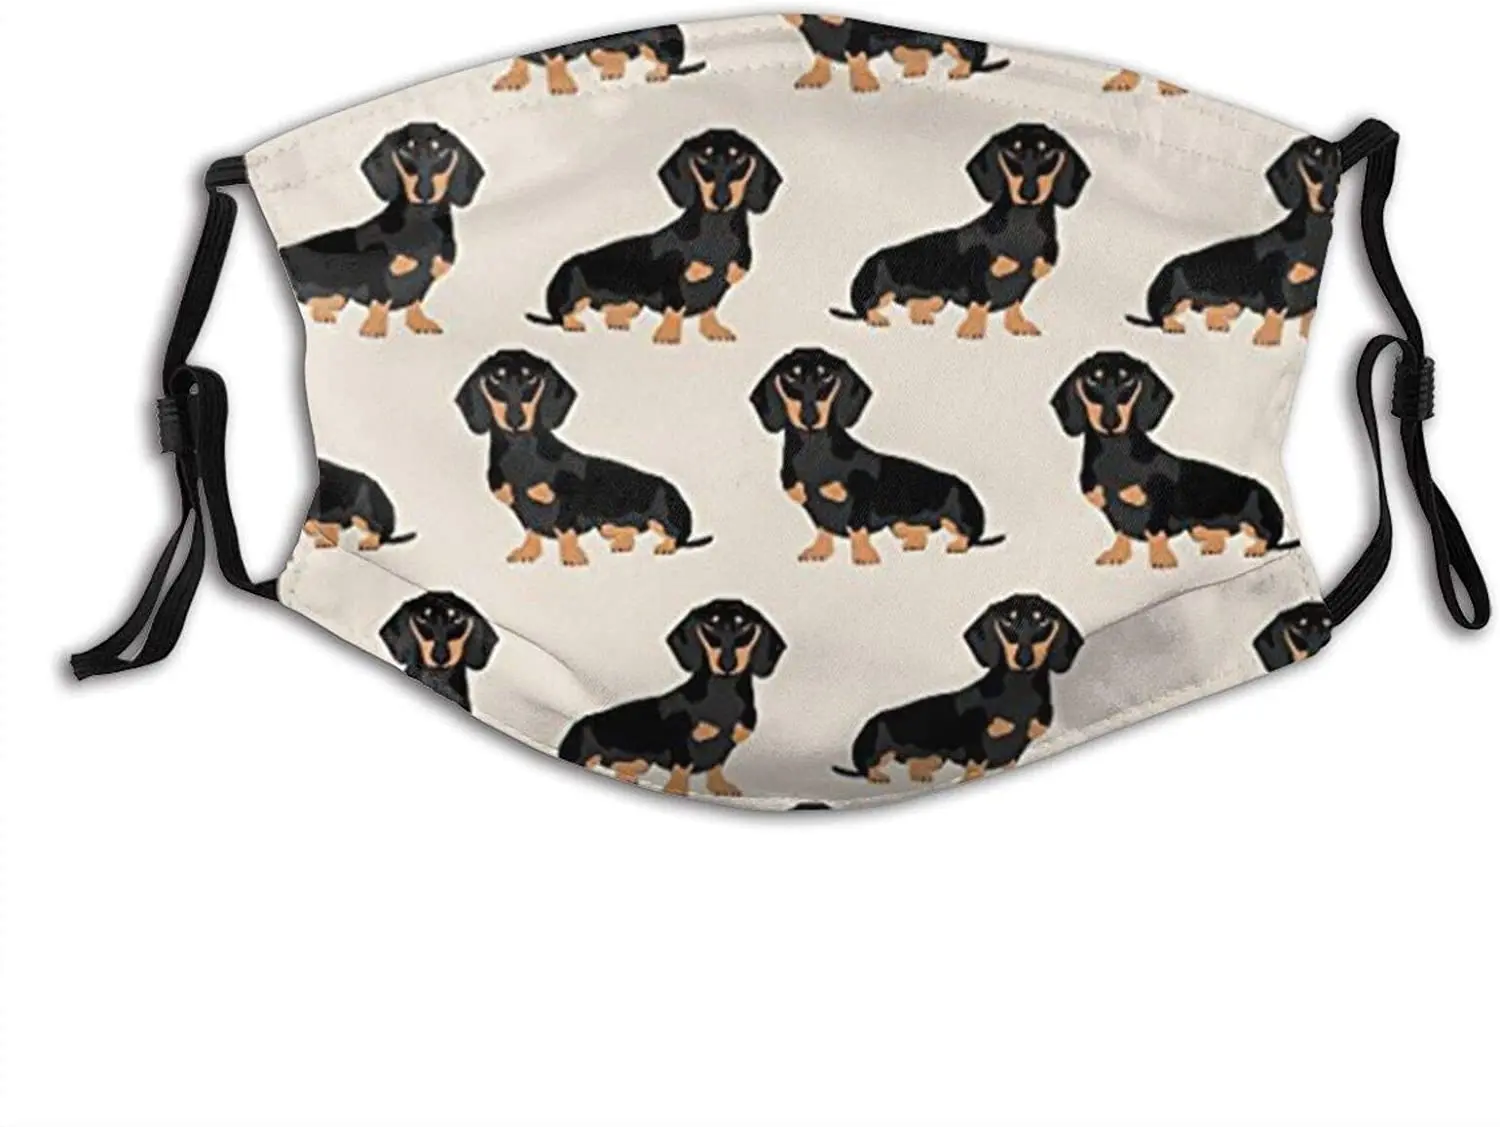 

Doxie Dachshund Weiner Dog Pet Dogs Face Mask Reusable Adjustable Balaclava Bandana Cloth With 2 Filters For Men And Women